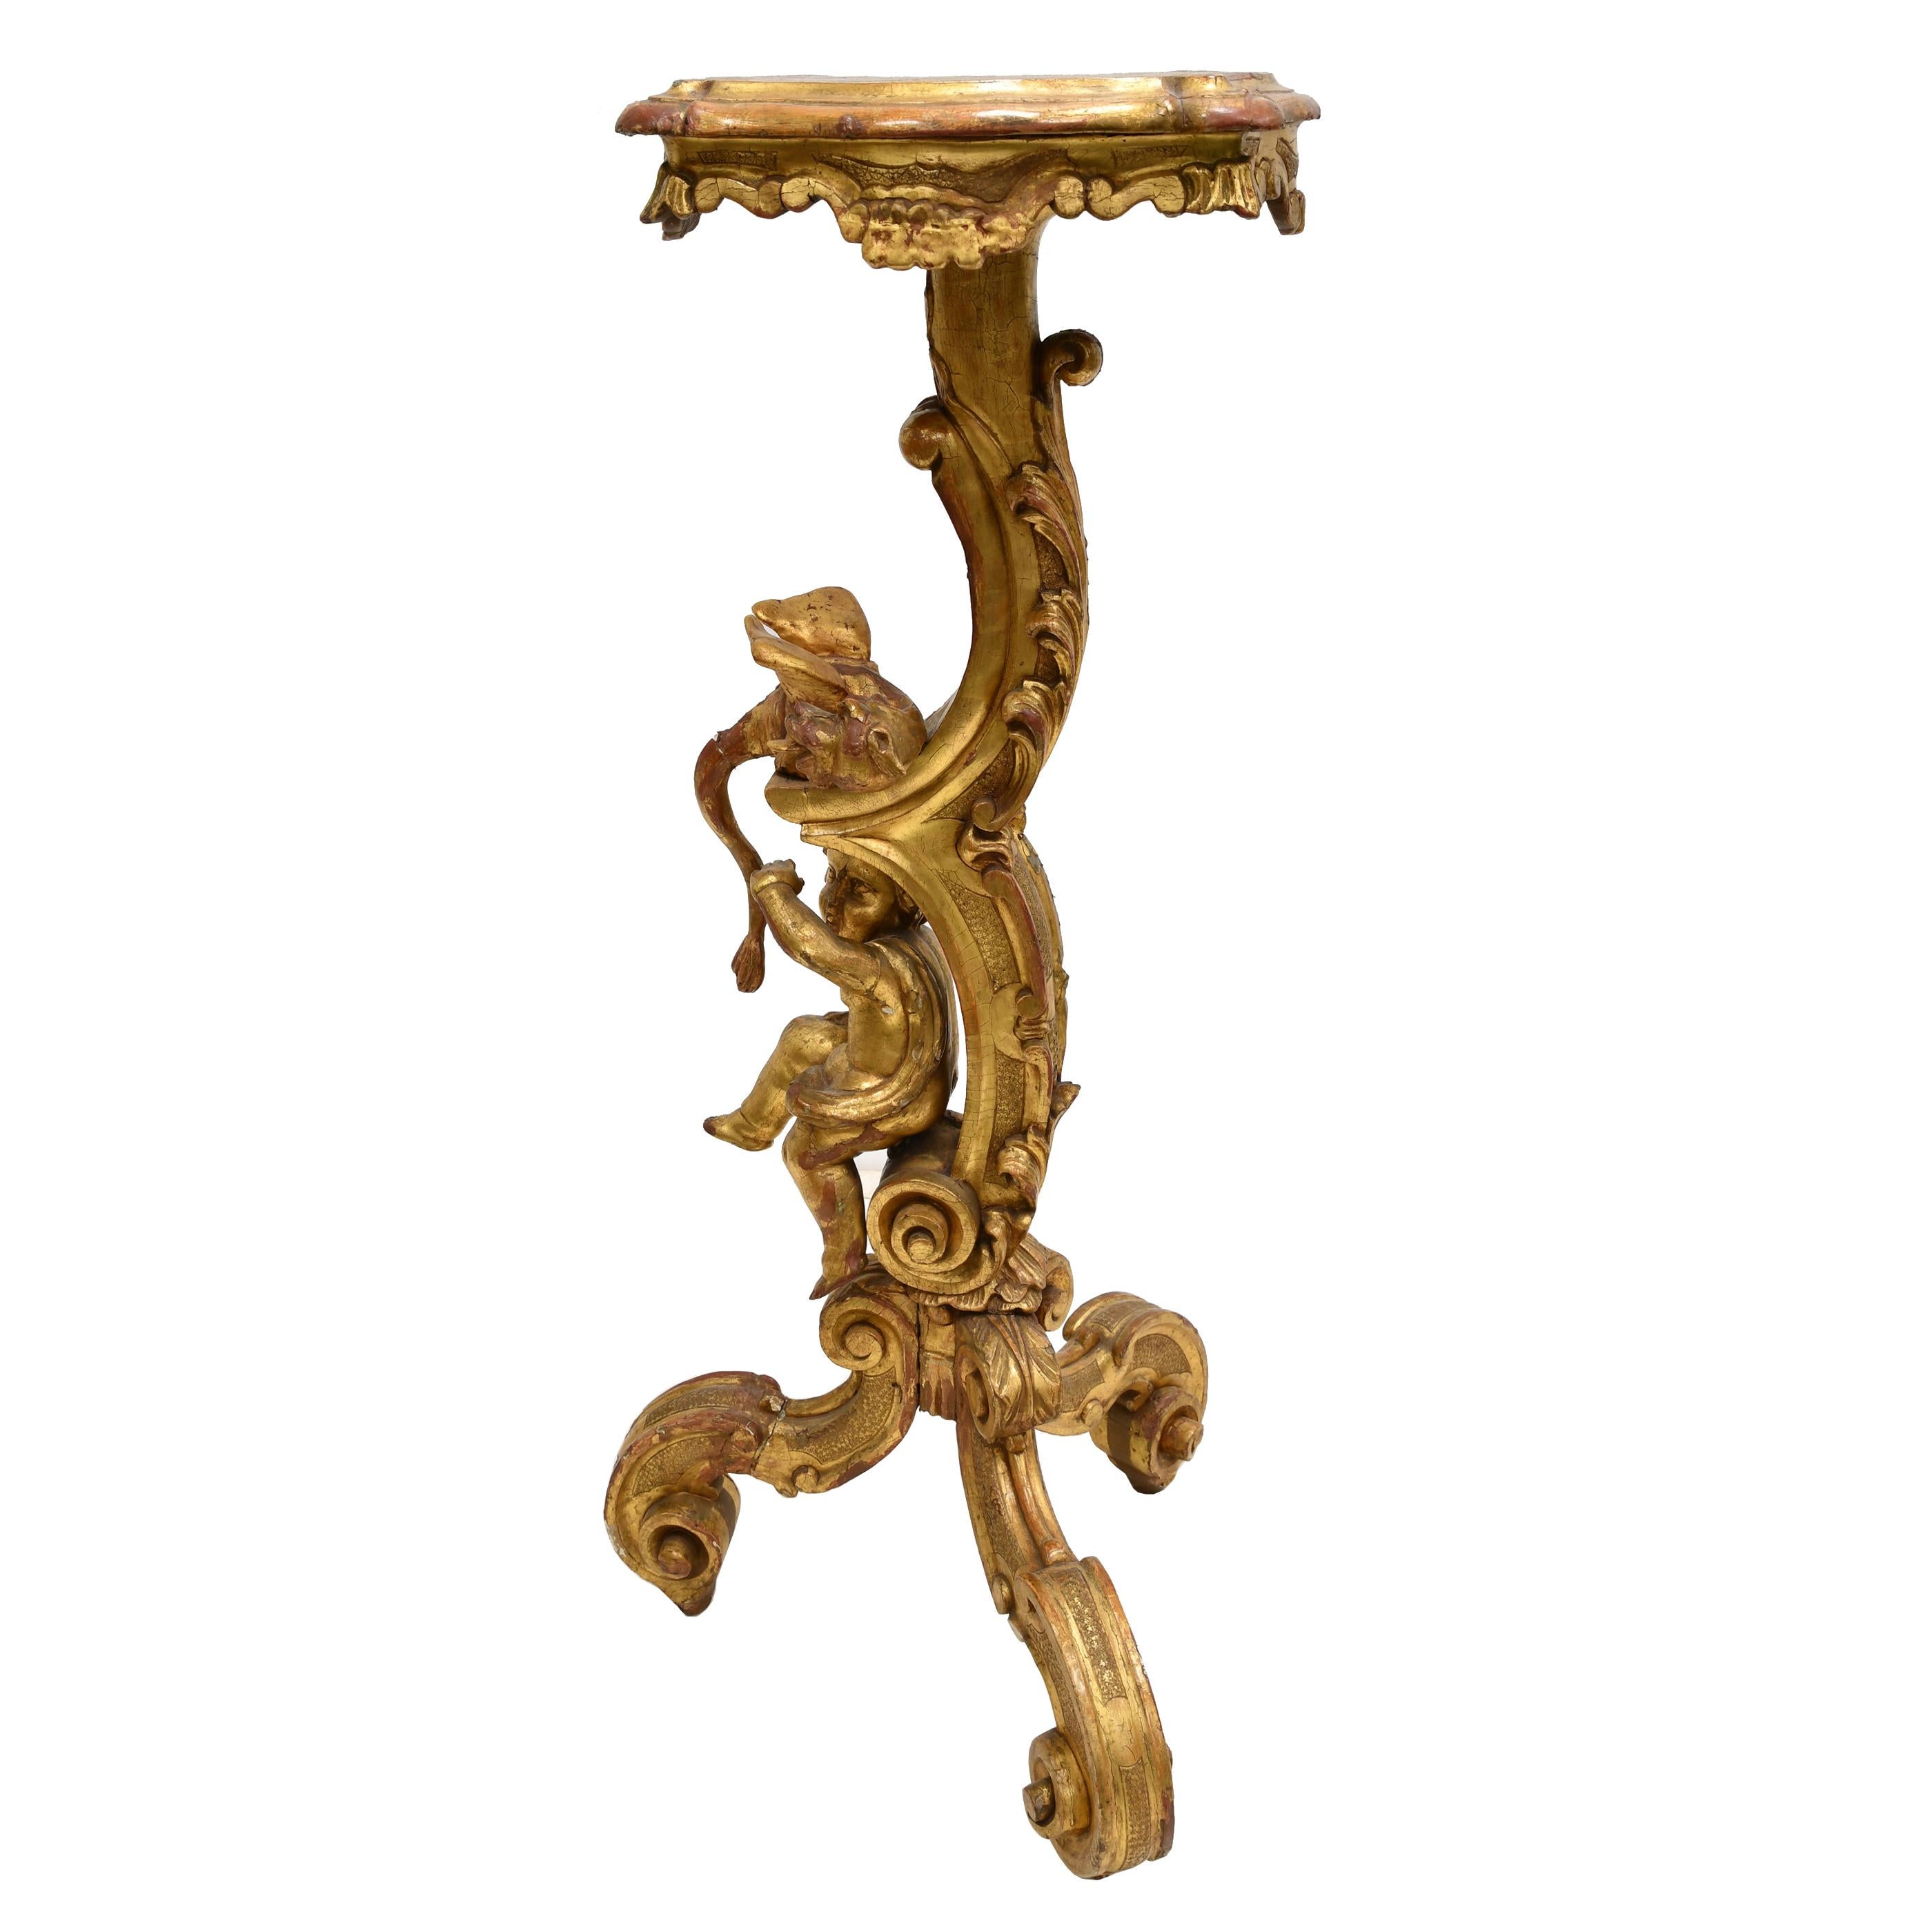 Italian Antique Venetian Trespolo Pedestal Stand in Gilded Wood w/ Carved Dragon & Putto